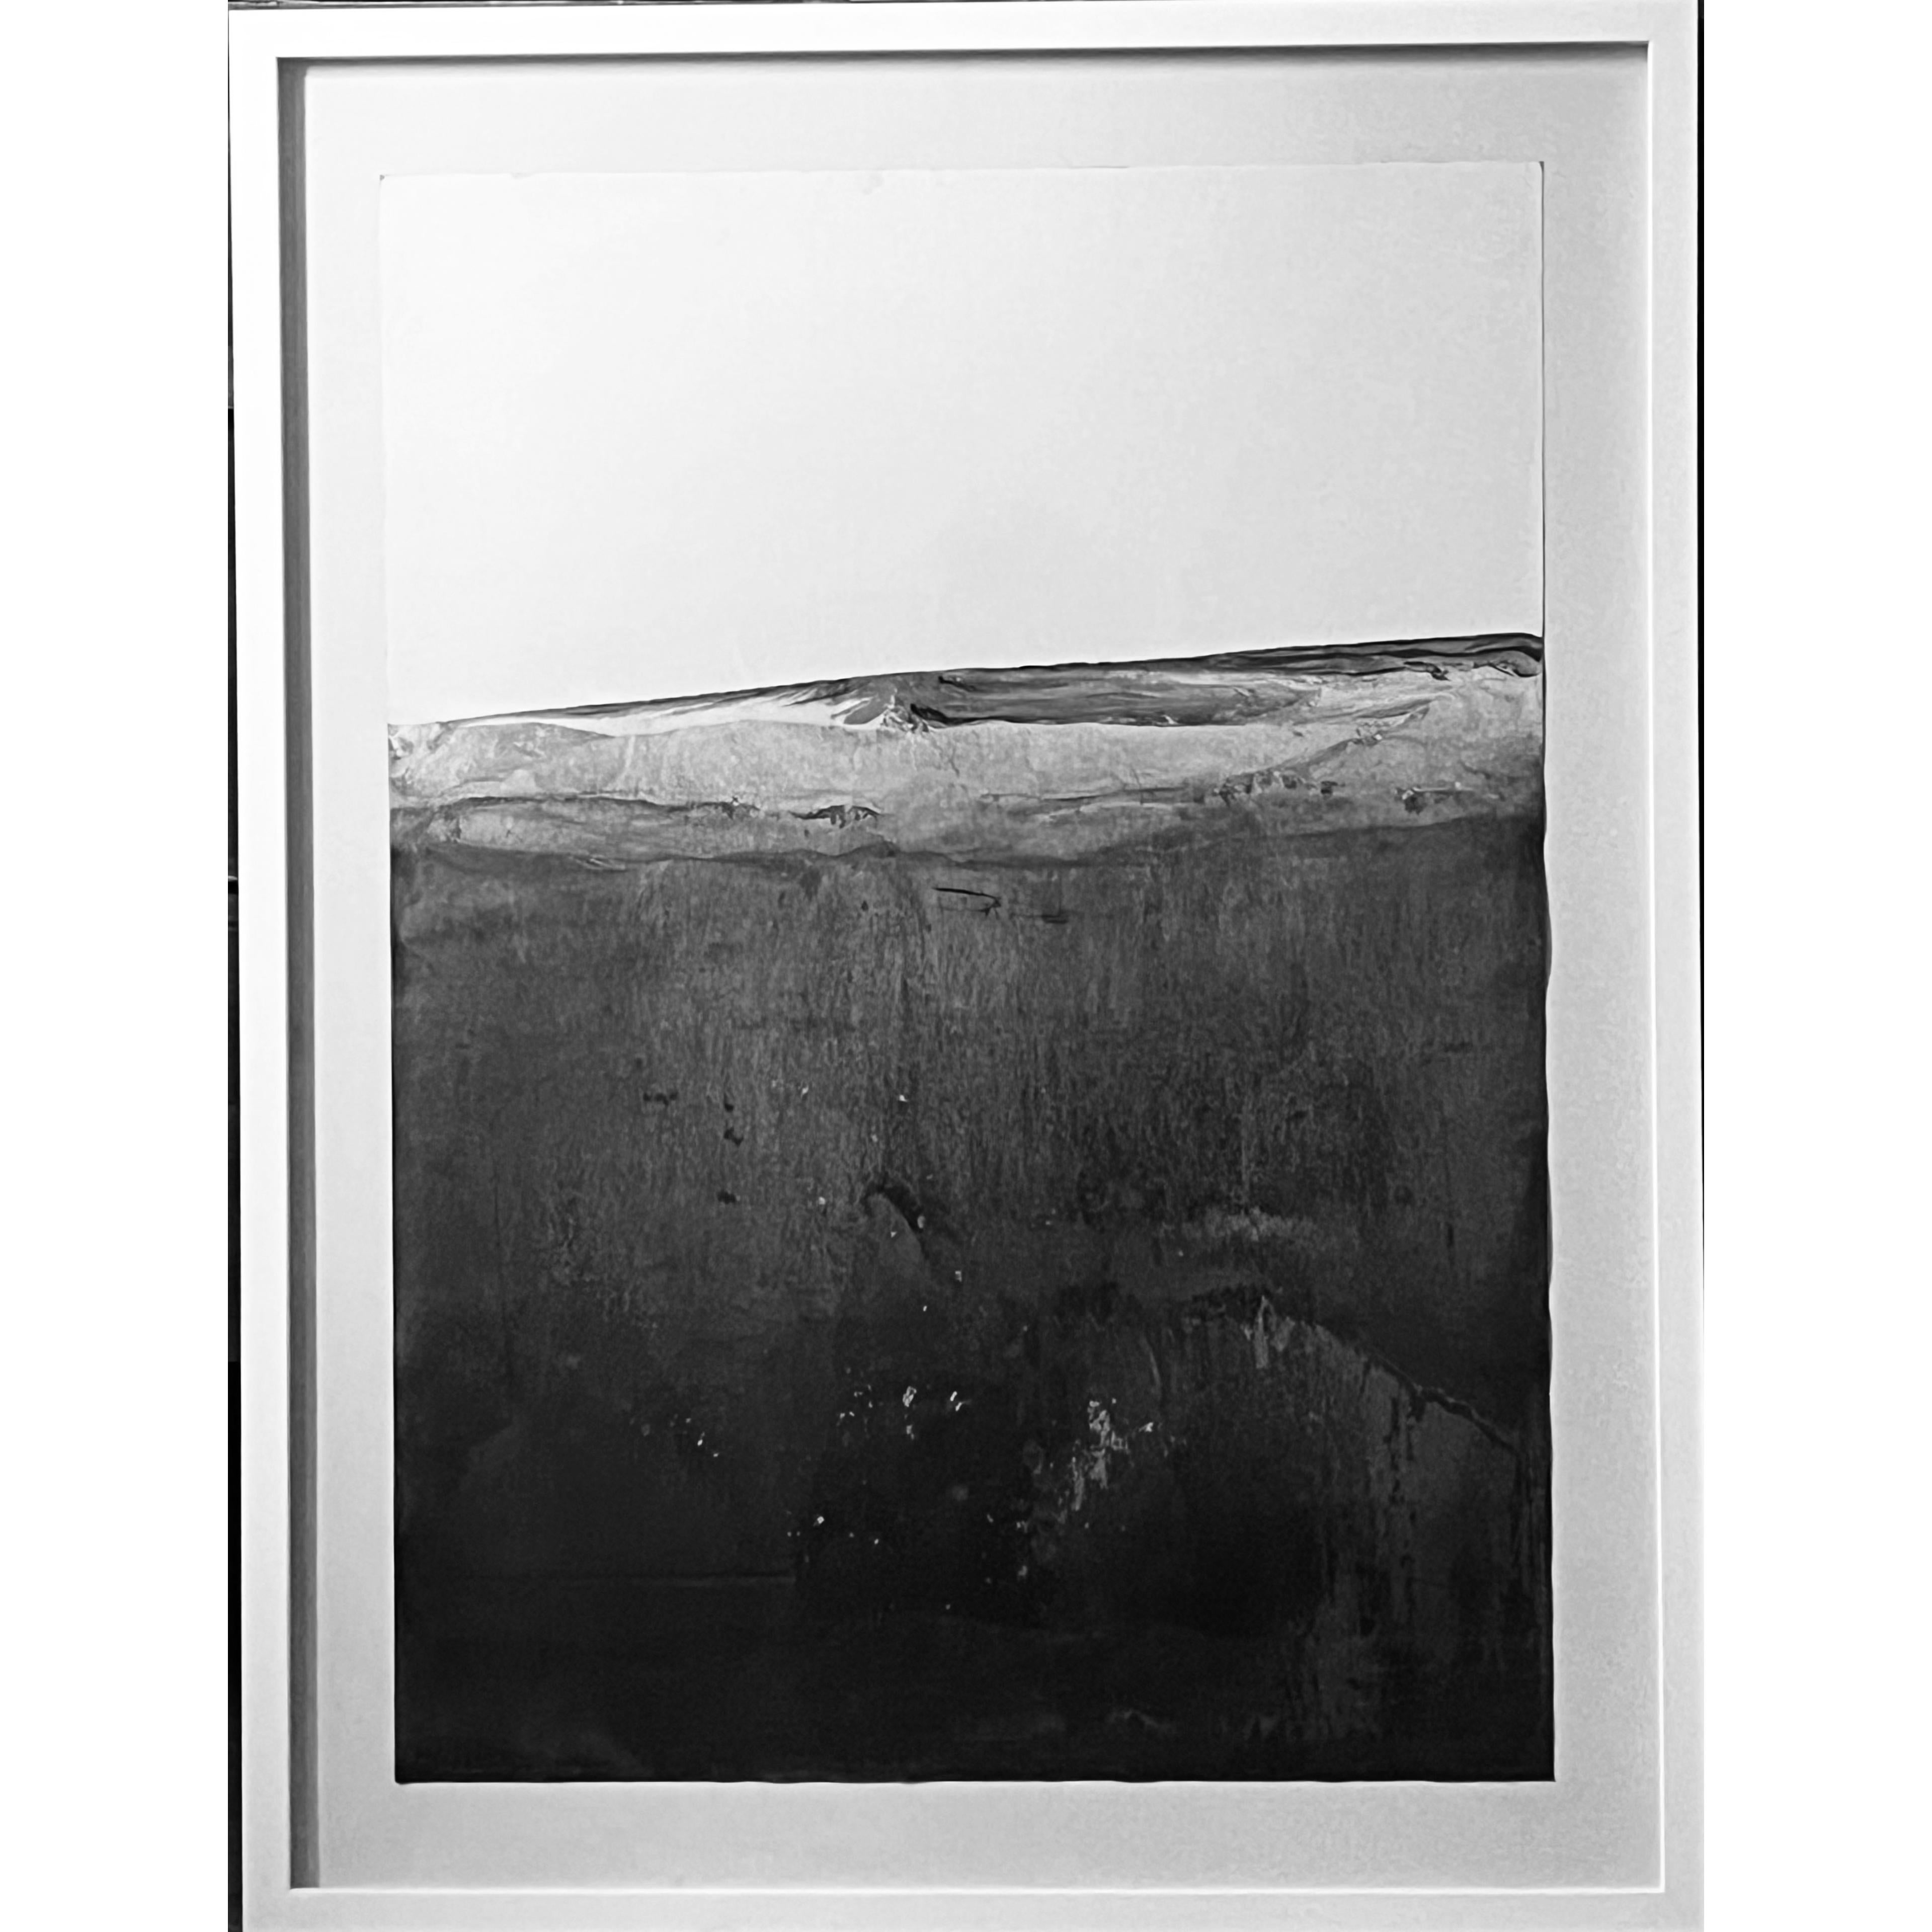 Landscape BW Abstract Drawing Ready to Hang - Original Art Made in Italy